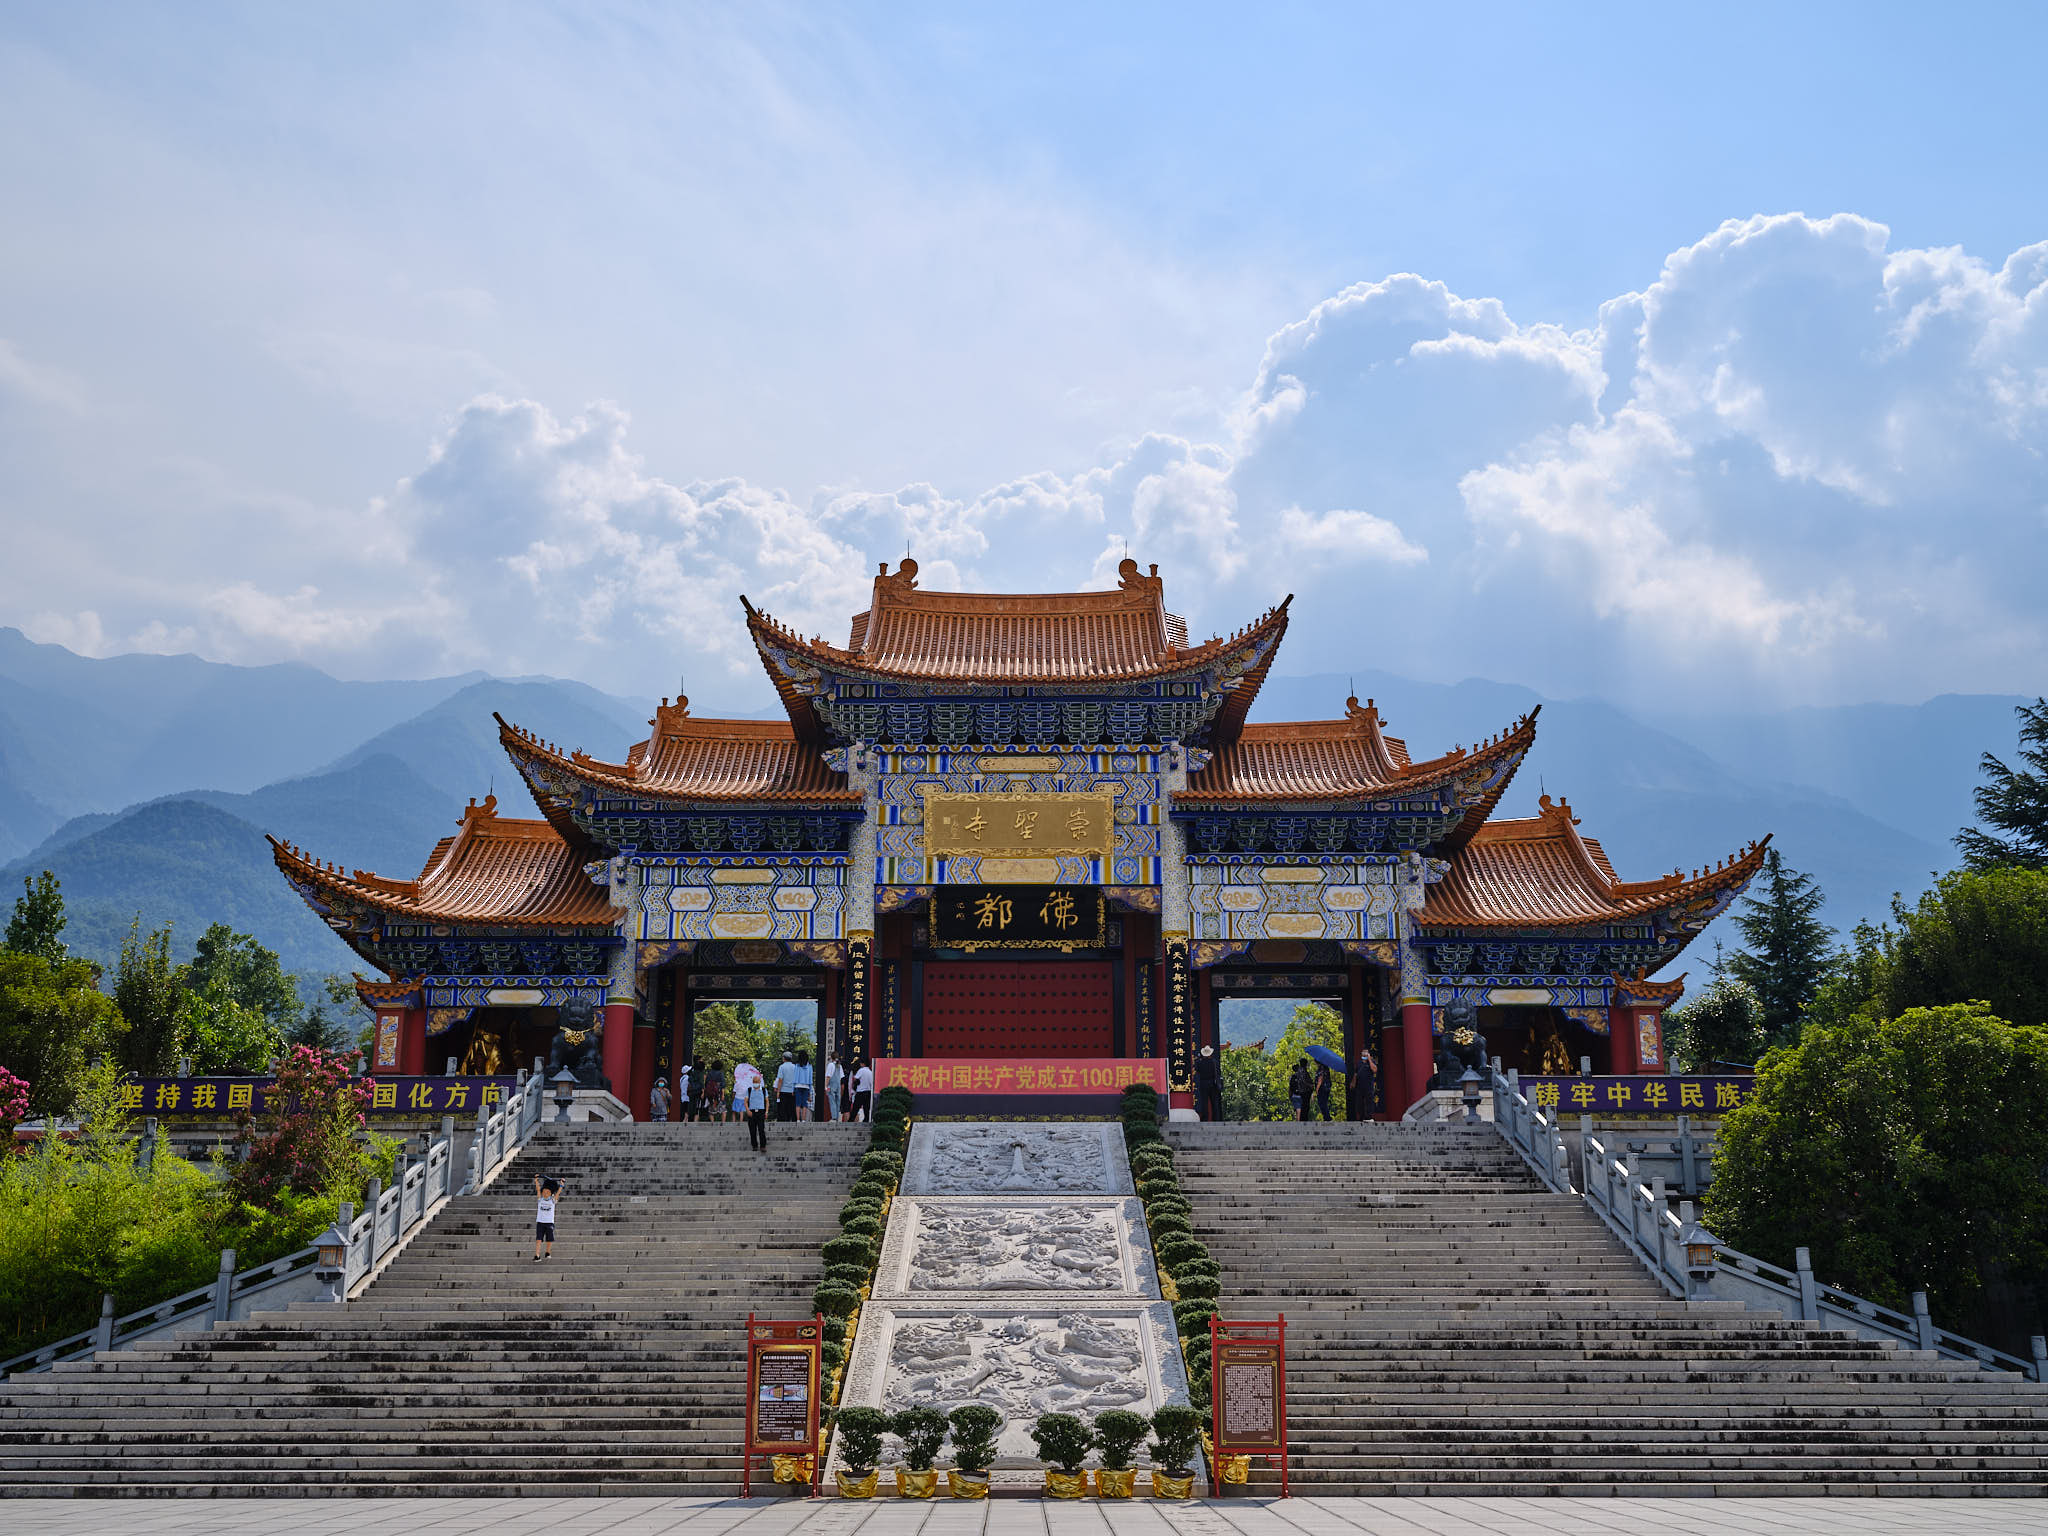 Cangshan Mountain temple with mountains in the back